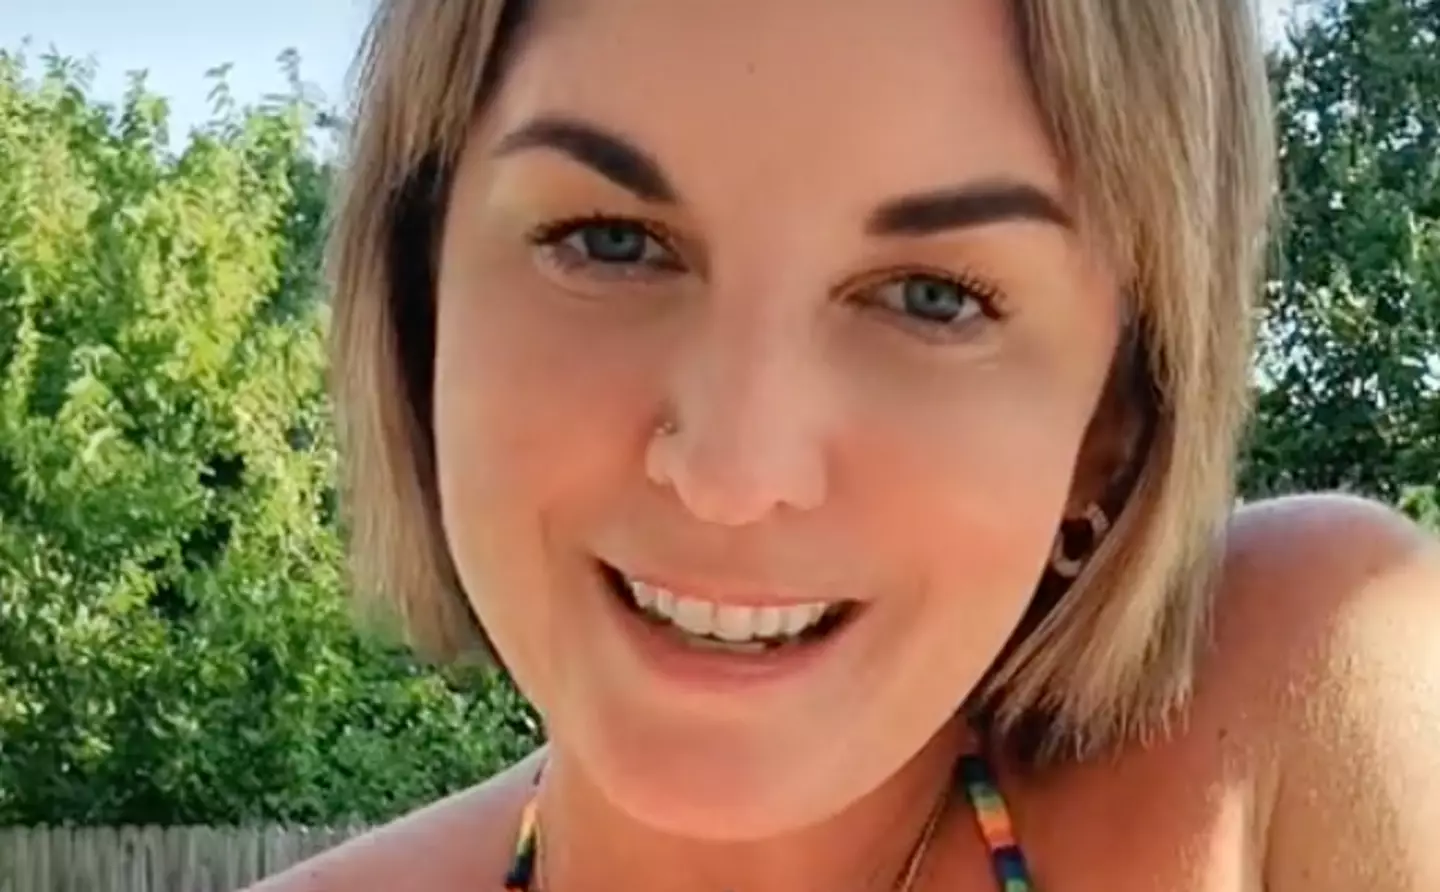 Nicole regularly shares videos from her garden.